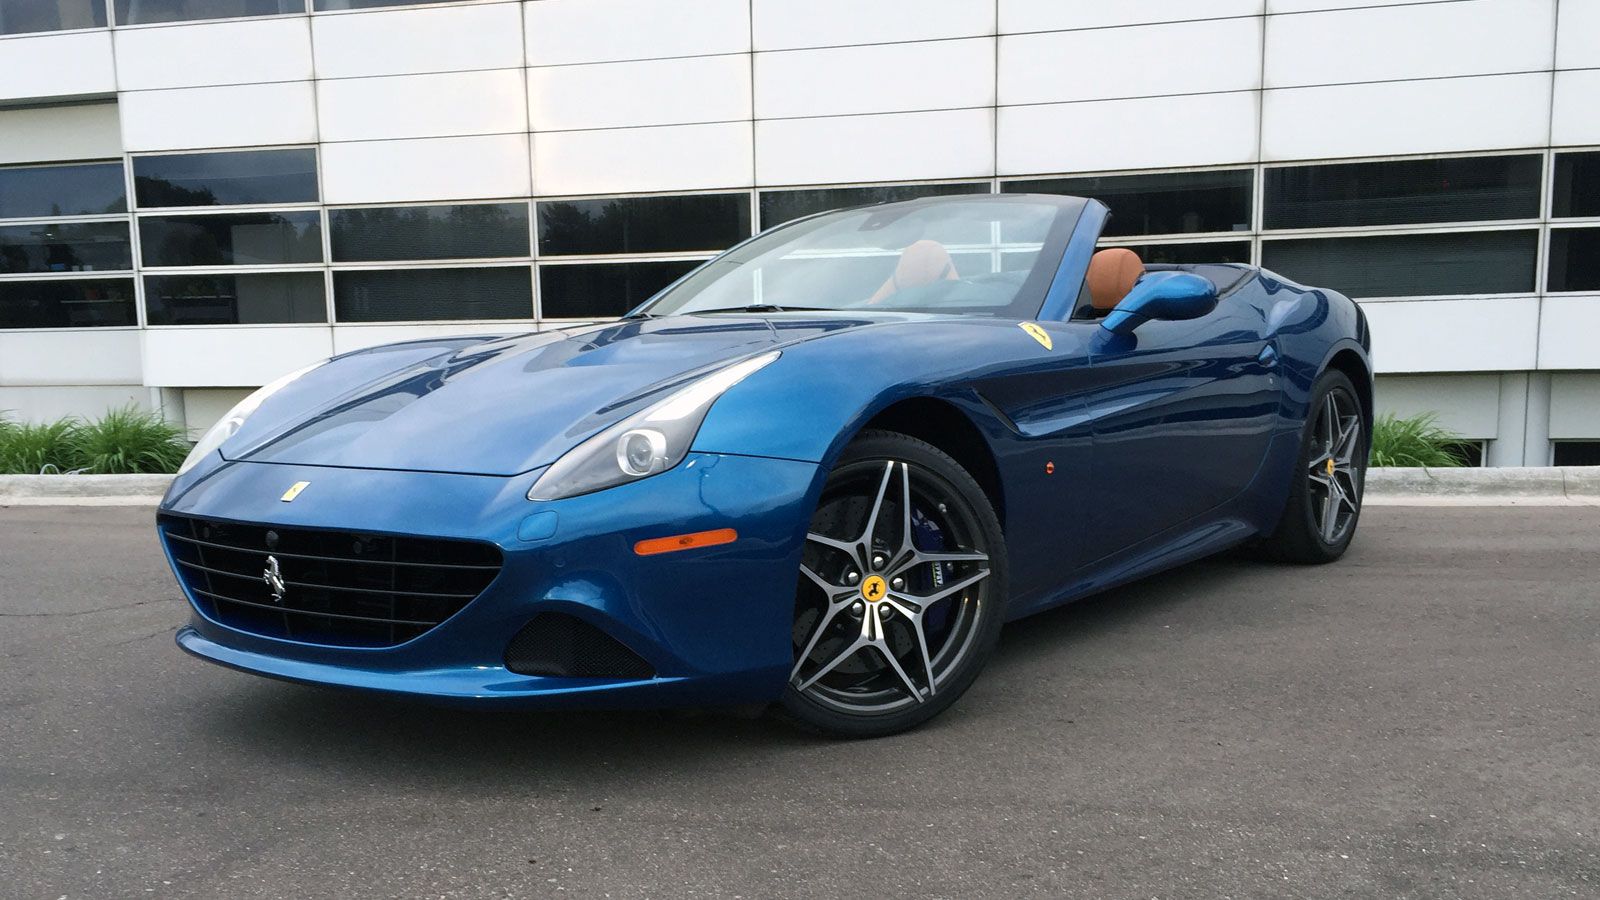 2017 Ferrari California T review: Saving lives and blowing tires